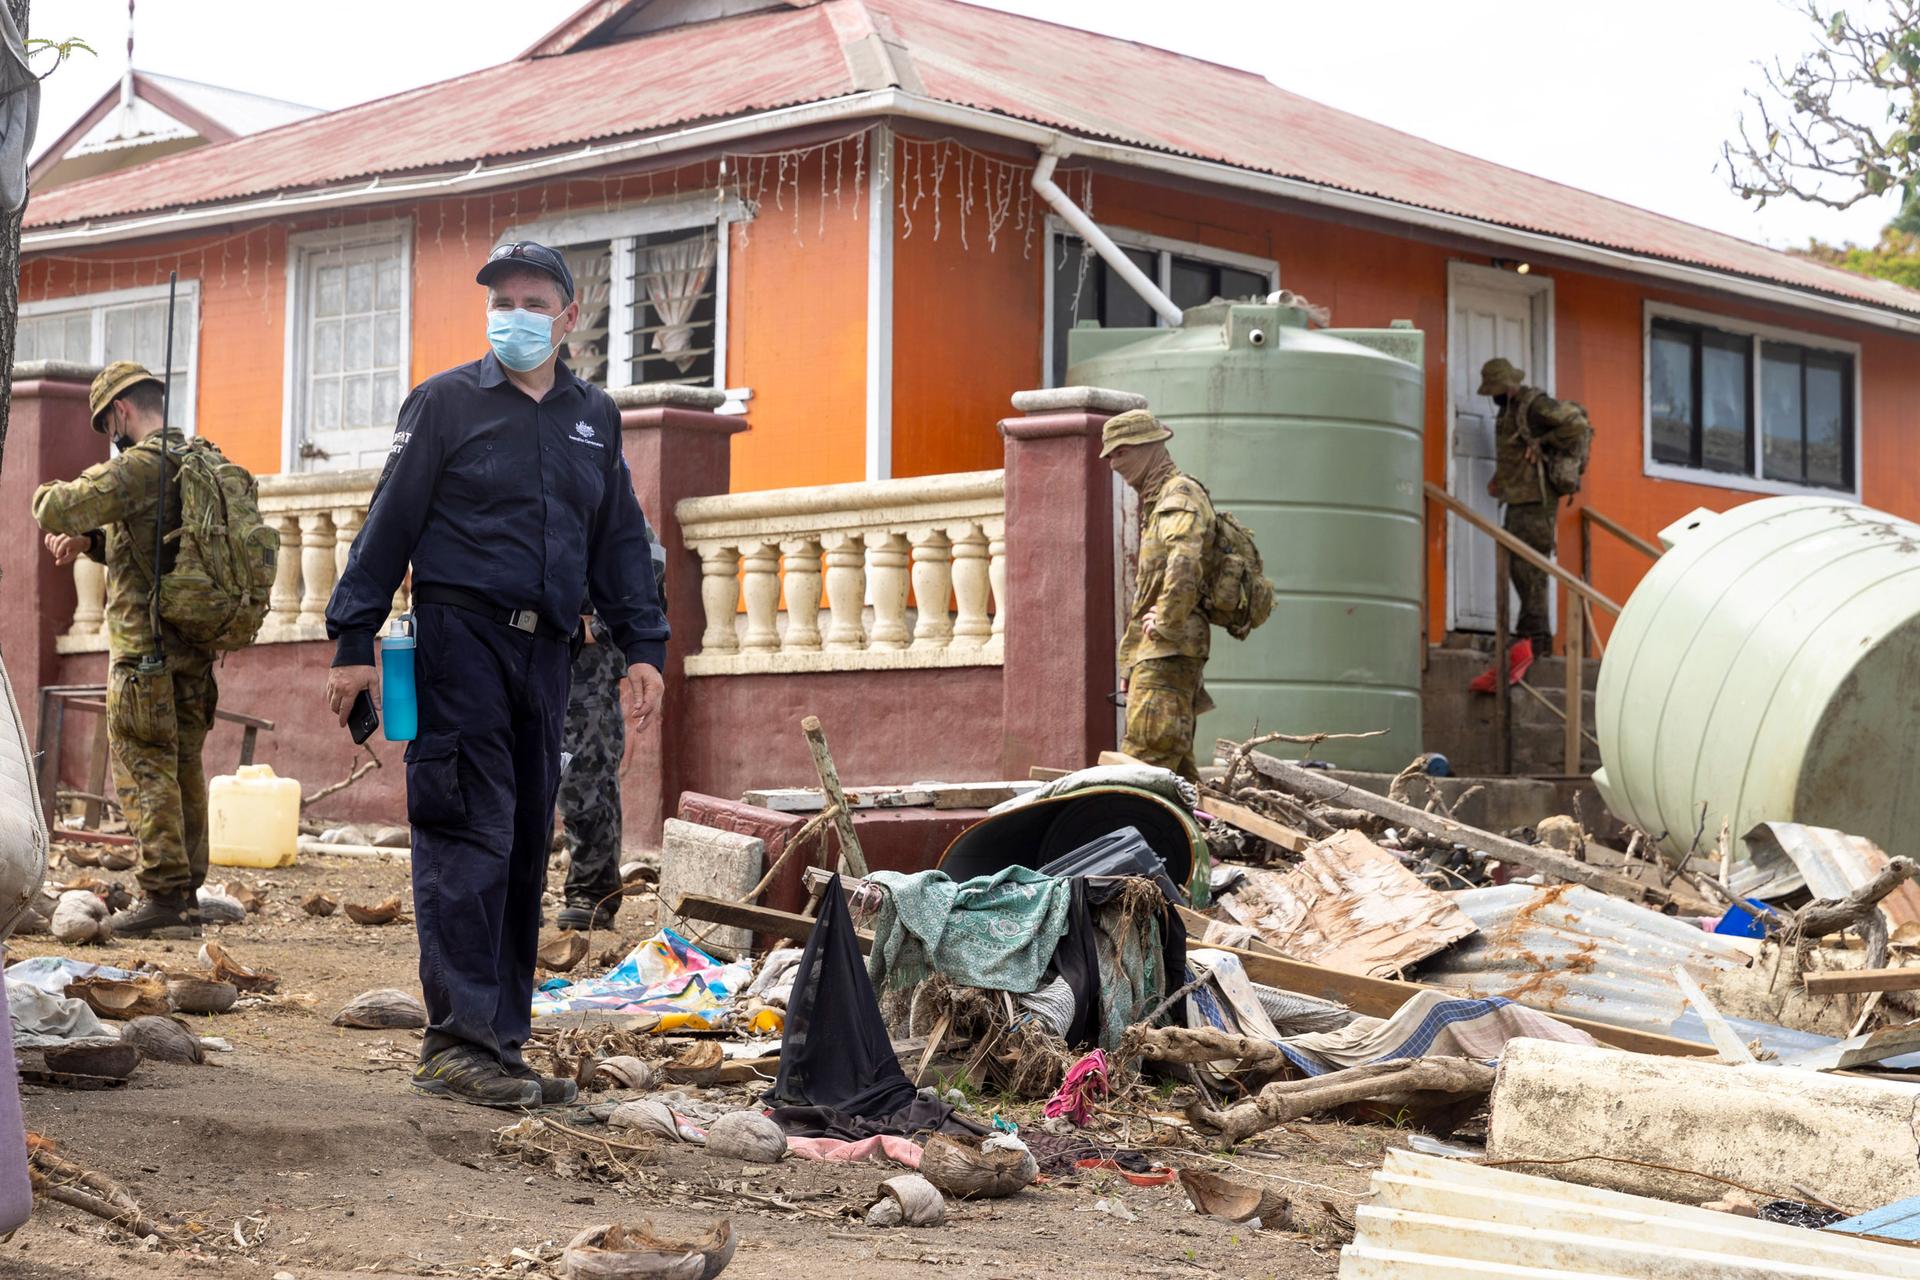 In this photo provided by the Australian Defense Force, Australian Defence Force and Department of Foreign Affairs & Trade crisis response team personnel make a damage assessment operation in Nuku'alofa, on Atata island in Tonga, following the eruption of